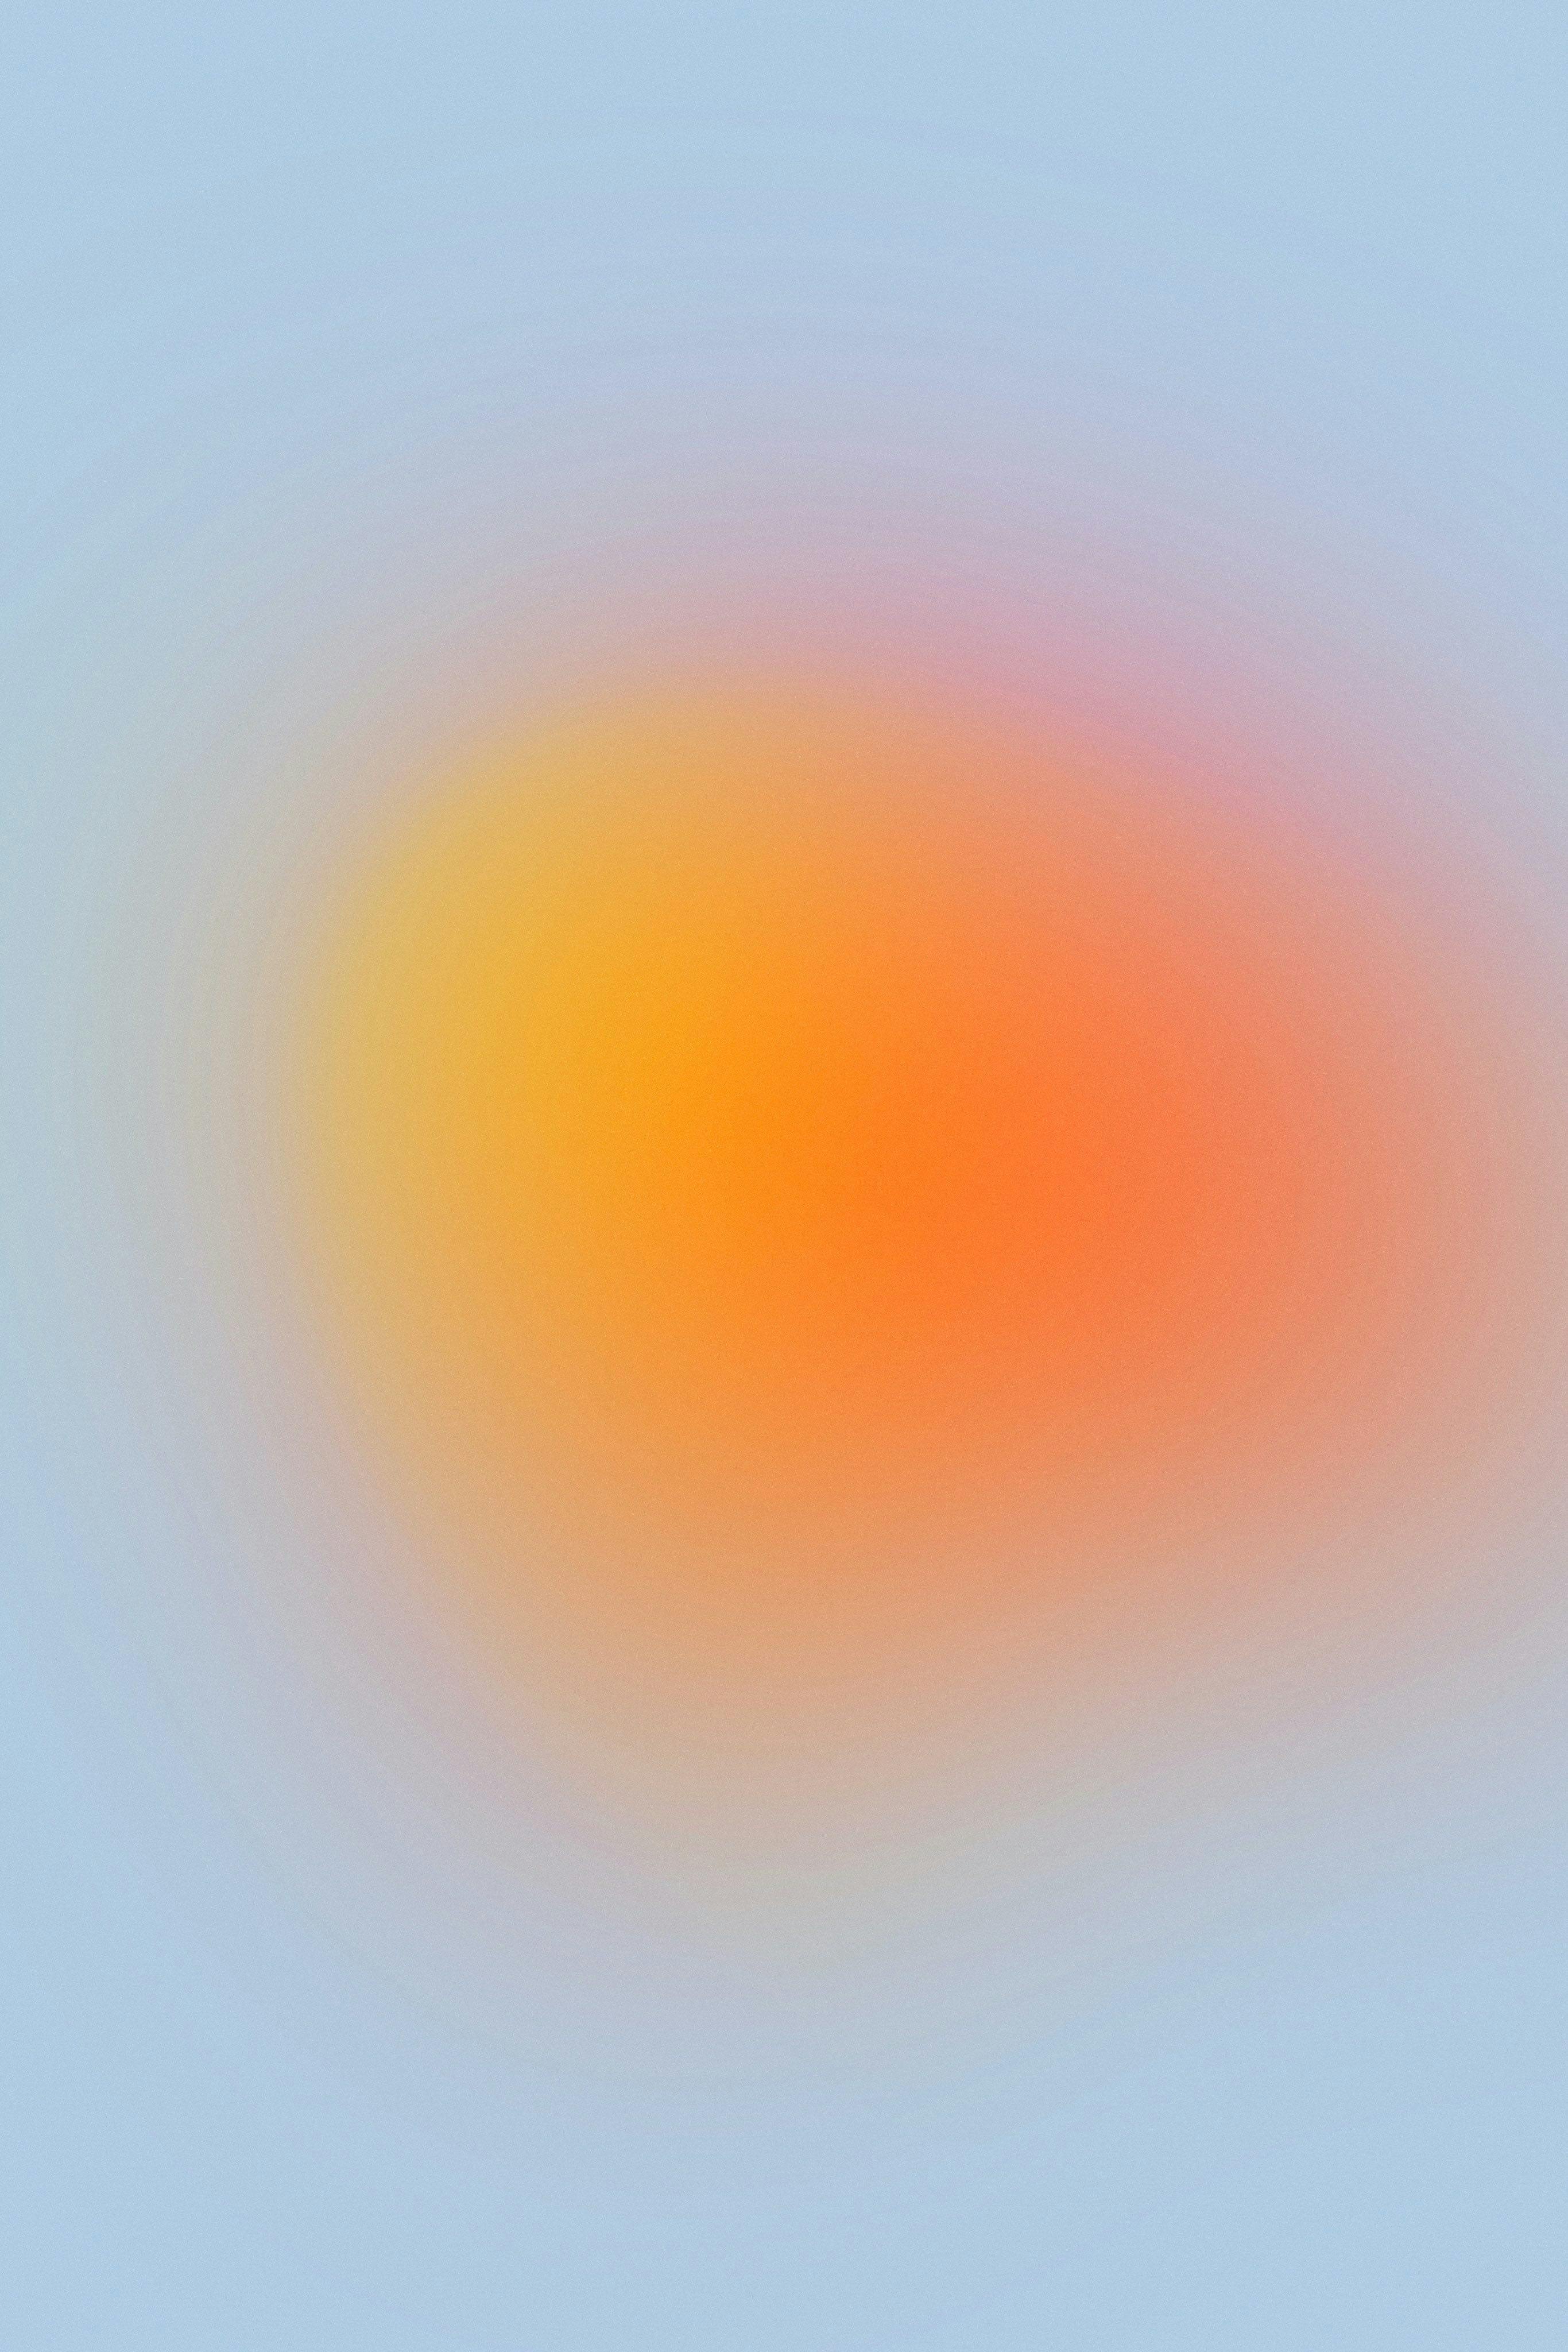 circular yellow-orange blurred radial gradient with pale blue background